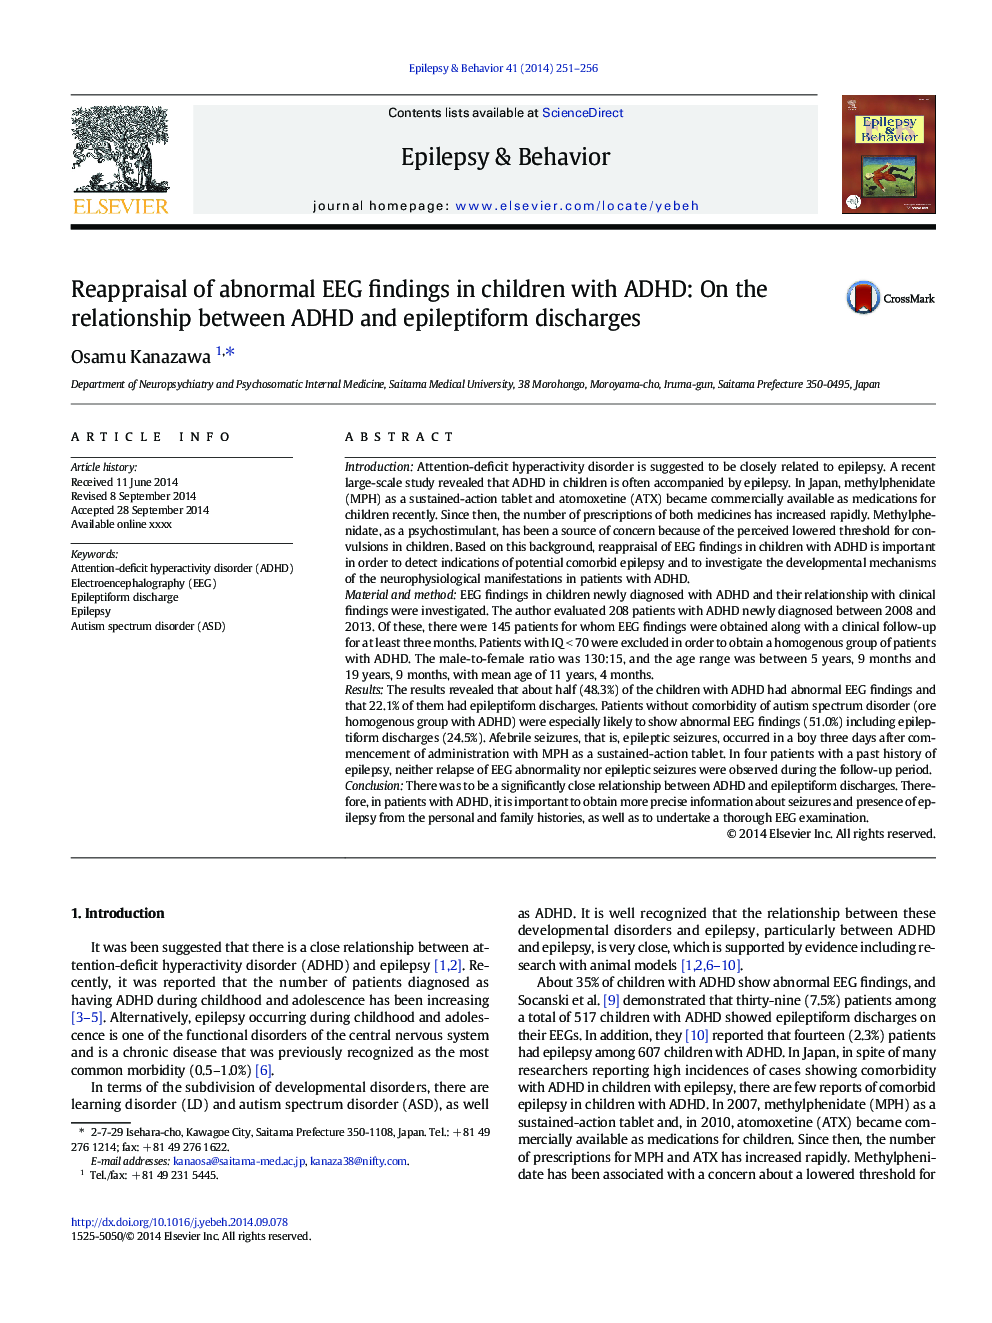 Reappraisal of abnormal EEG findings in children with ADHD: On the relationship between ADHD and epileptiform discharges